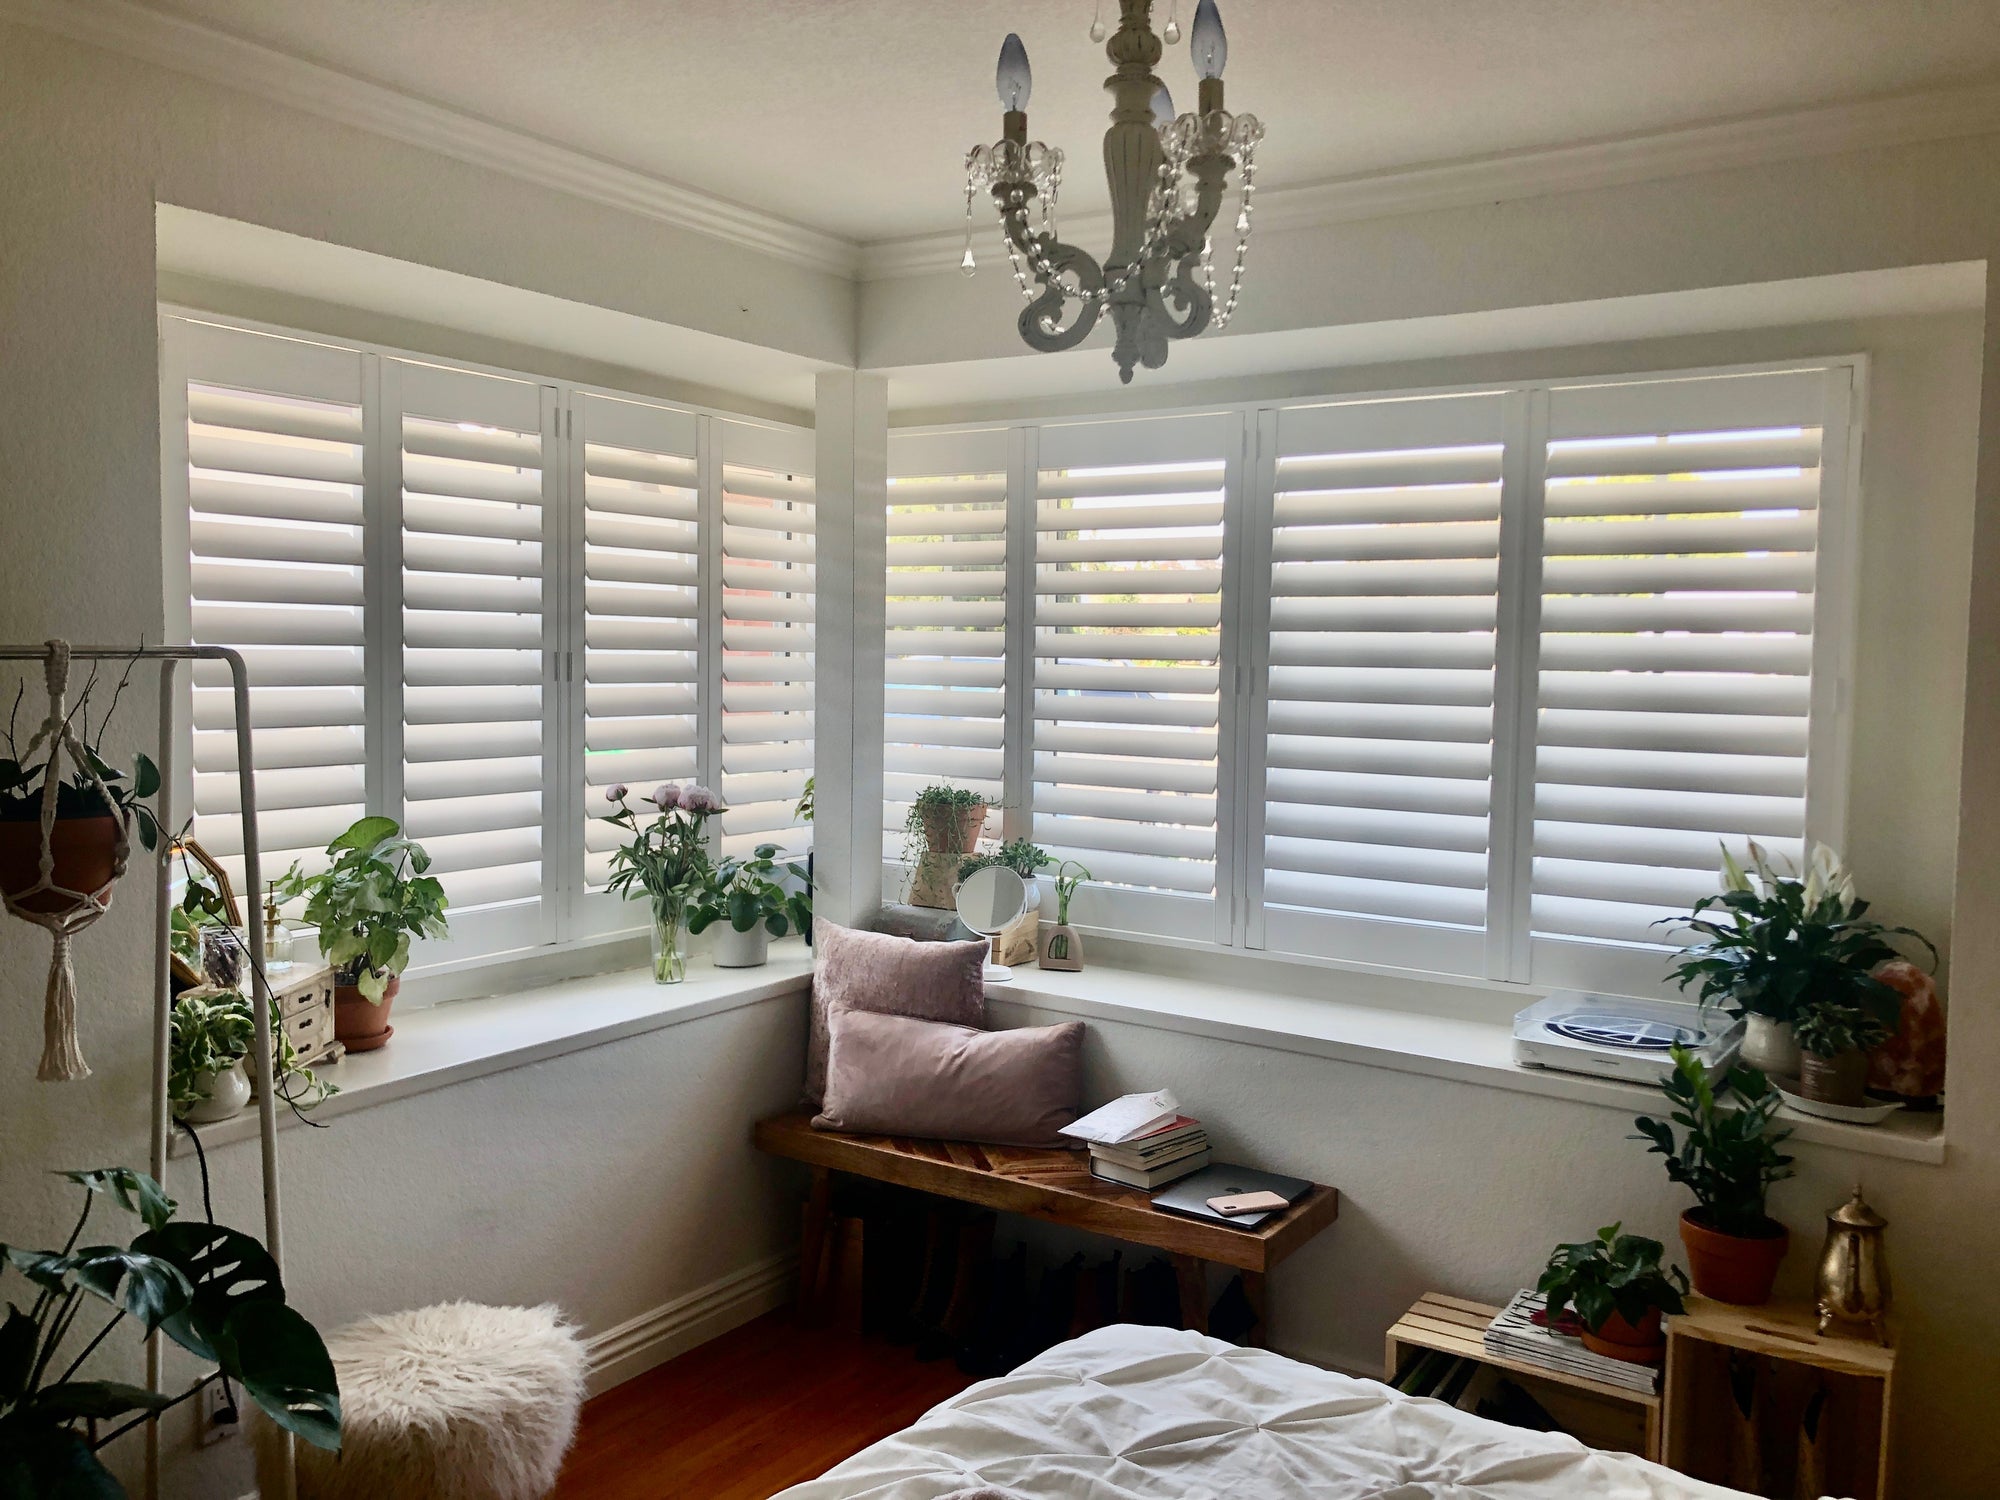 We discuss the best window treatments for homes near Huntington Beach, California, including shutters, shades, and available motorization options.